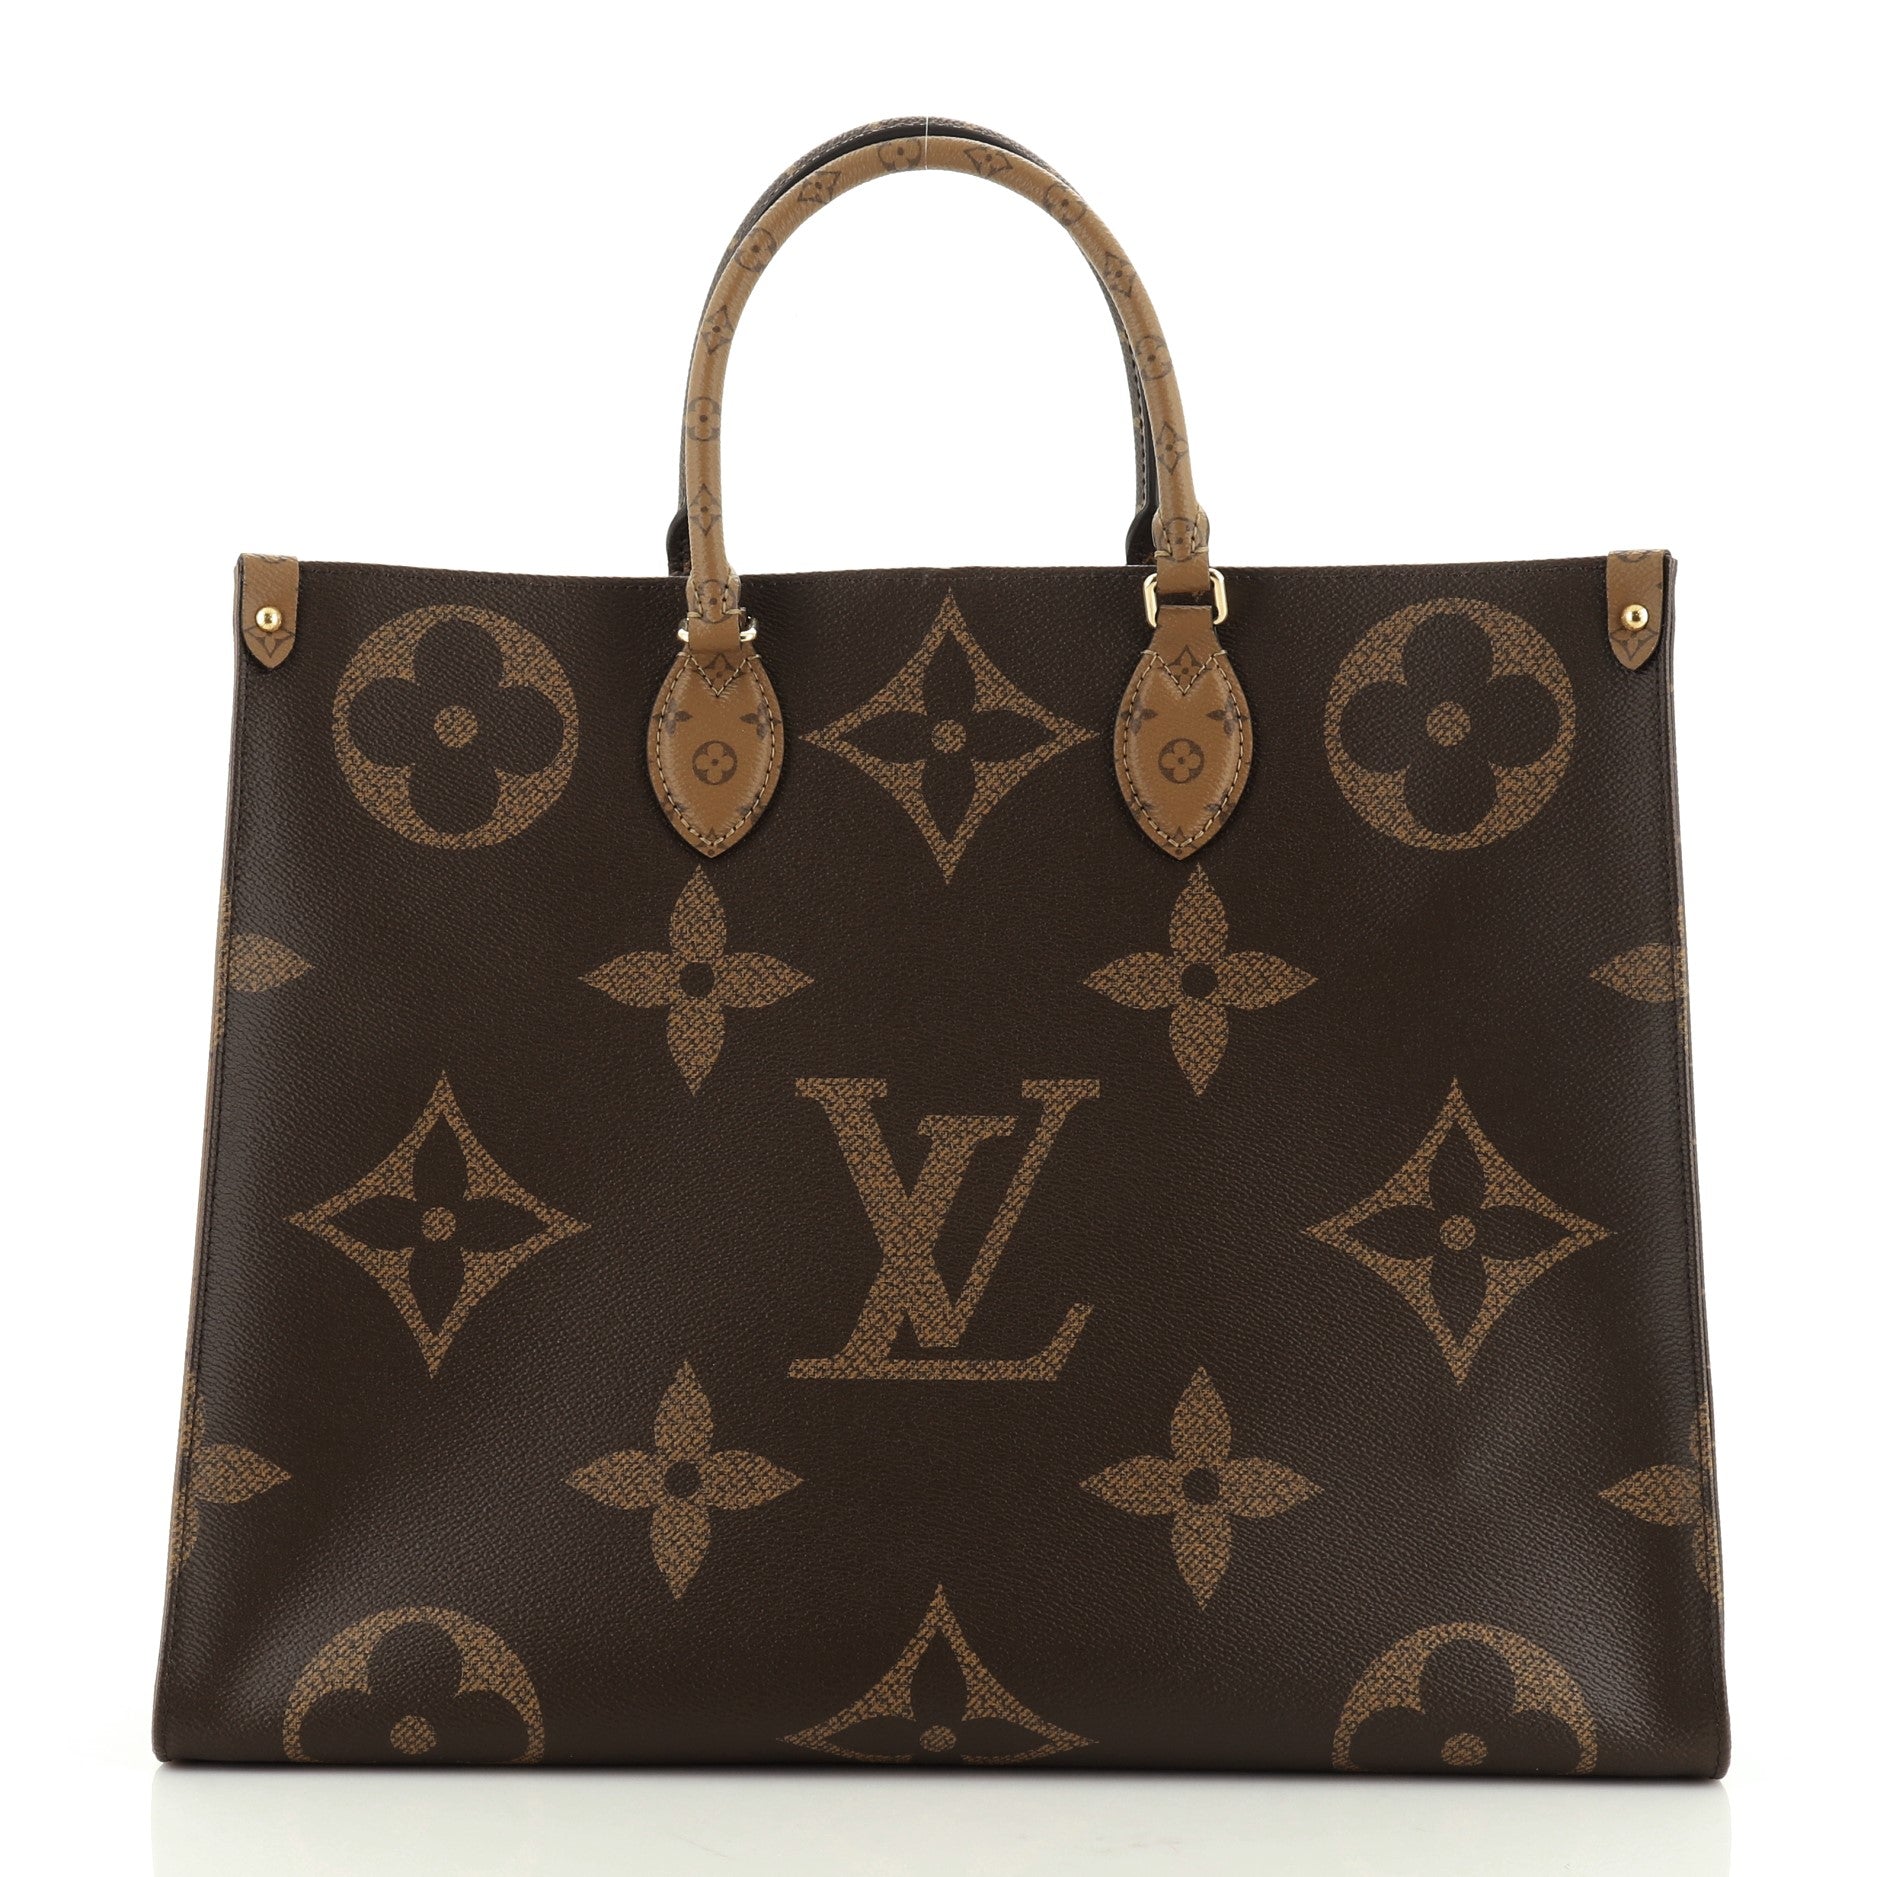 50563-116_20Louis_20Vuitton_20OnTheGo_20Tote_20Limited_20Editi_2D_0002.jpg?v=1577182796